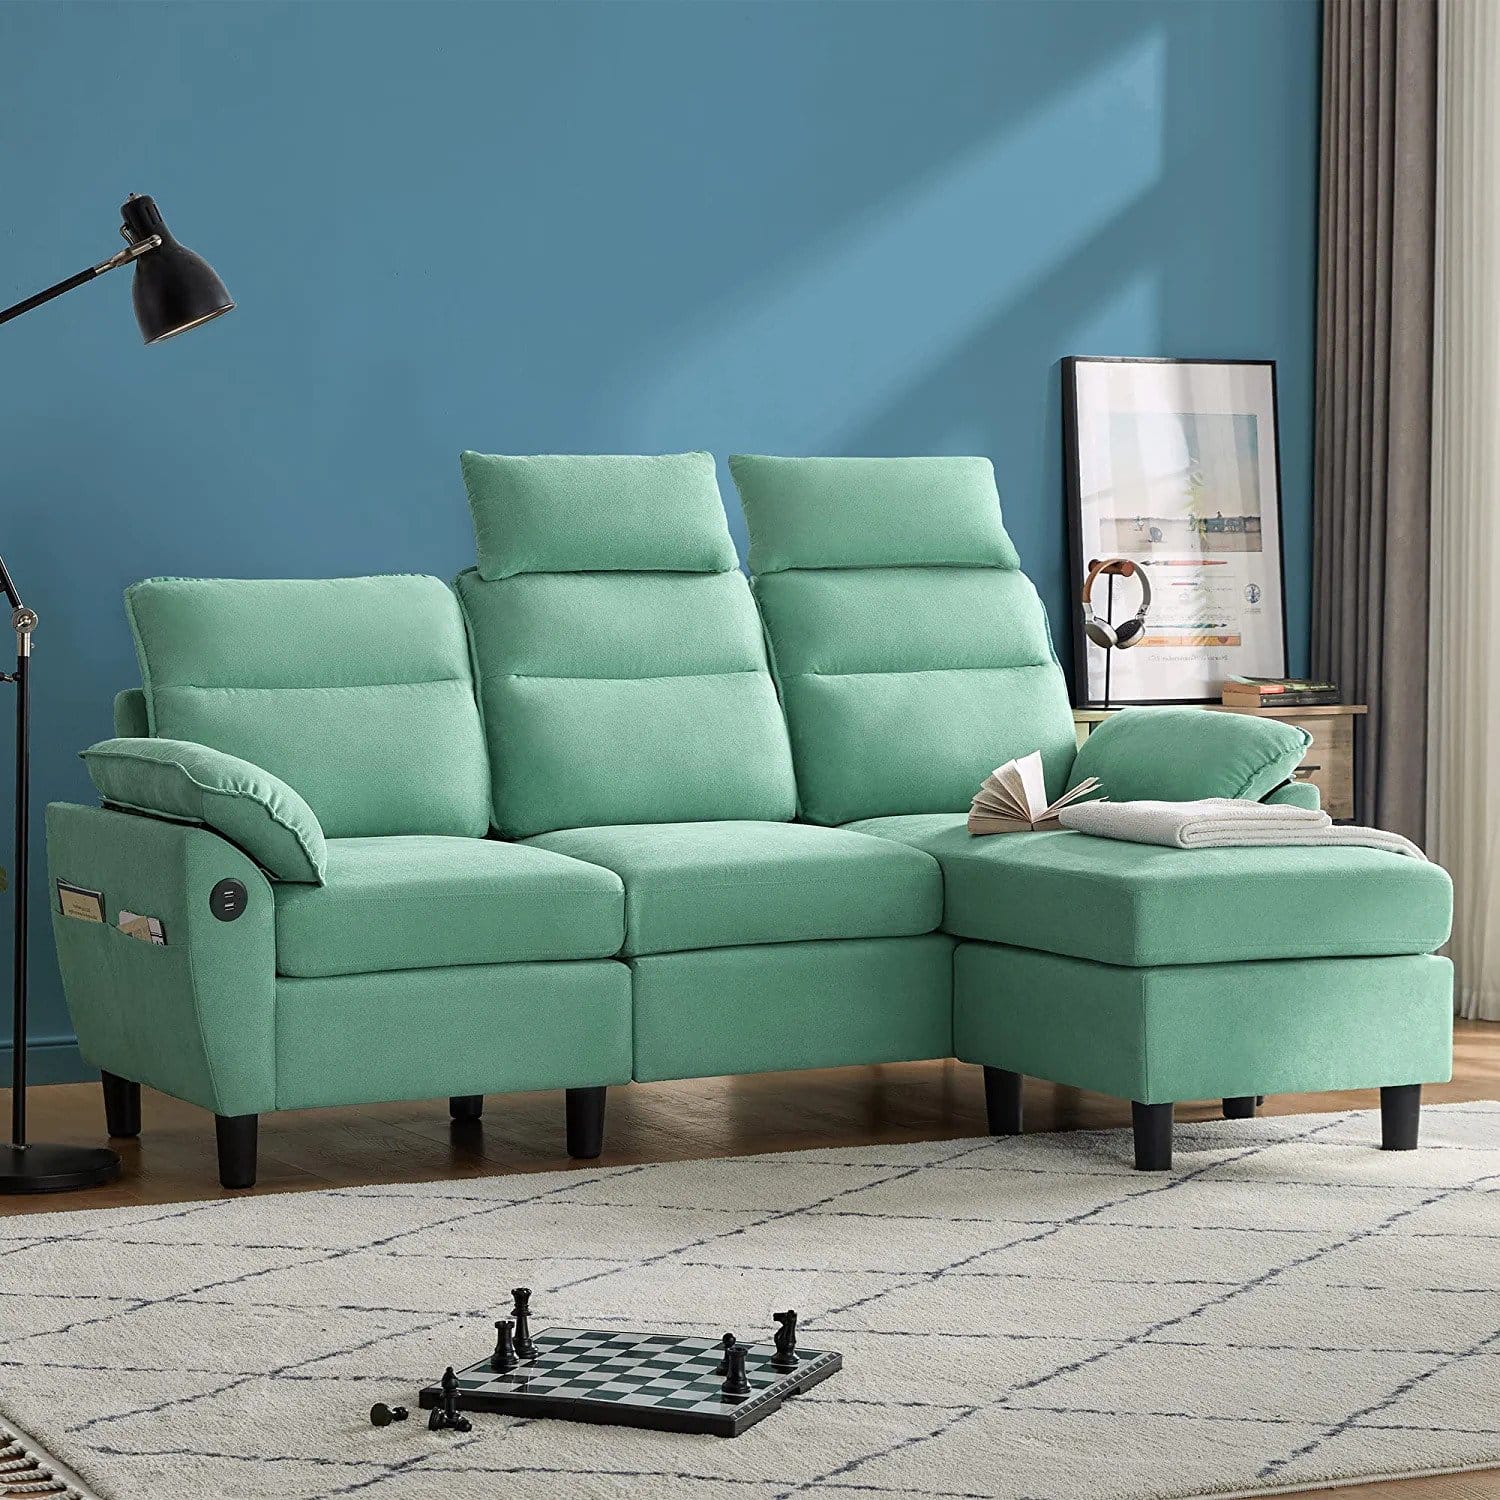 LINSY HOME Reversible Sectional Sofa Couch